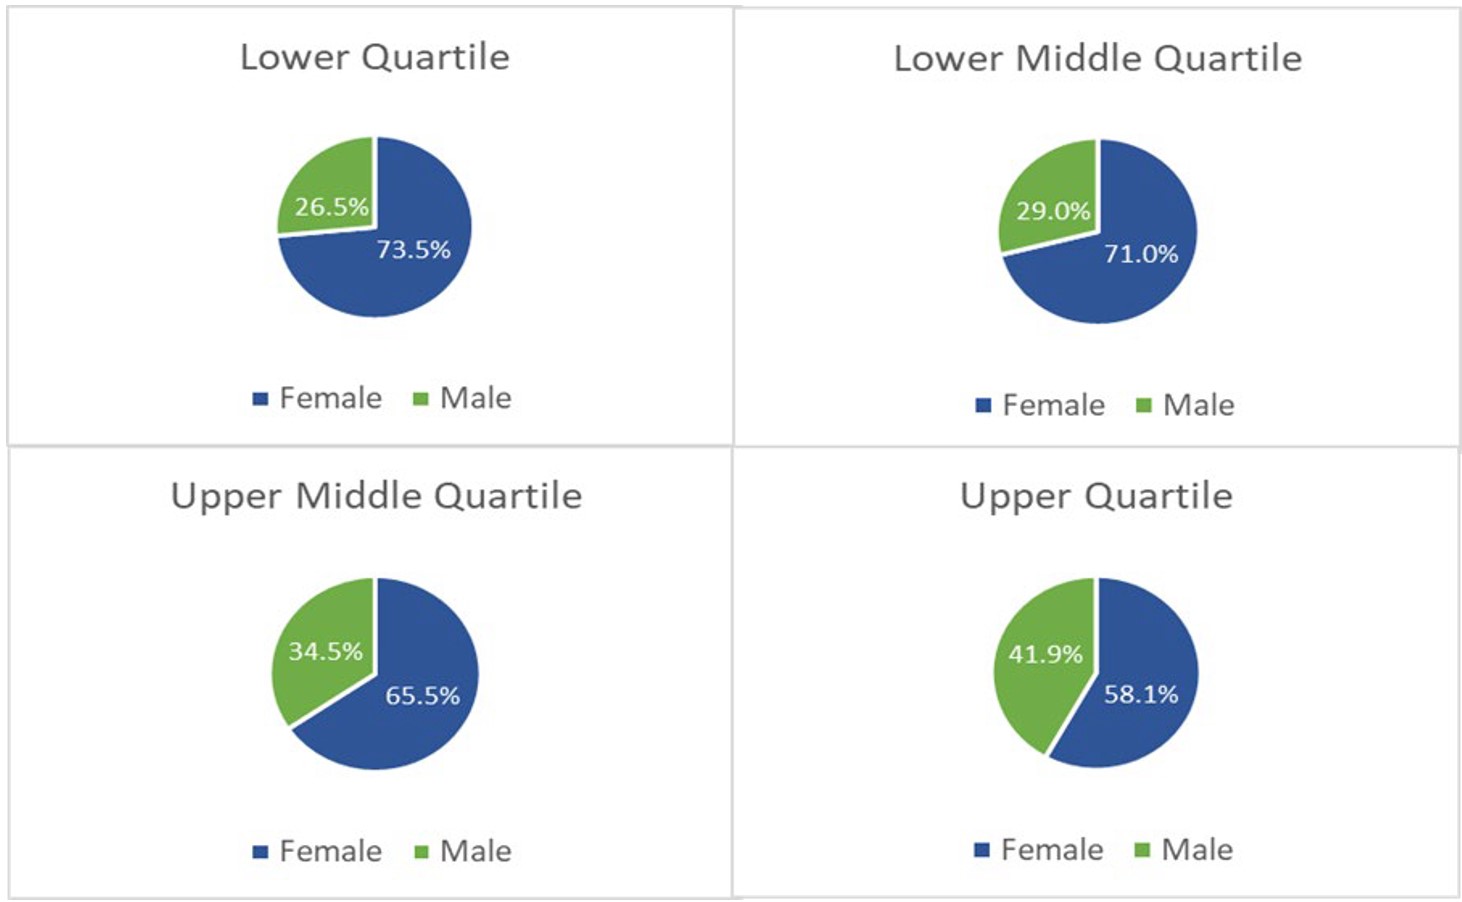 Four pie charts illustrating the distribution of females and males through each pay quartile: Lower Quartile: female 73.5%, male 26.5%/Lower Middle Quartile: female 71.0%, male 29.0%/Upper Middle Quartile: female 65.5%, male 34.5%/Upper Quartile: female 58.1%, male 41.9% 